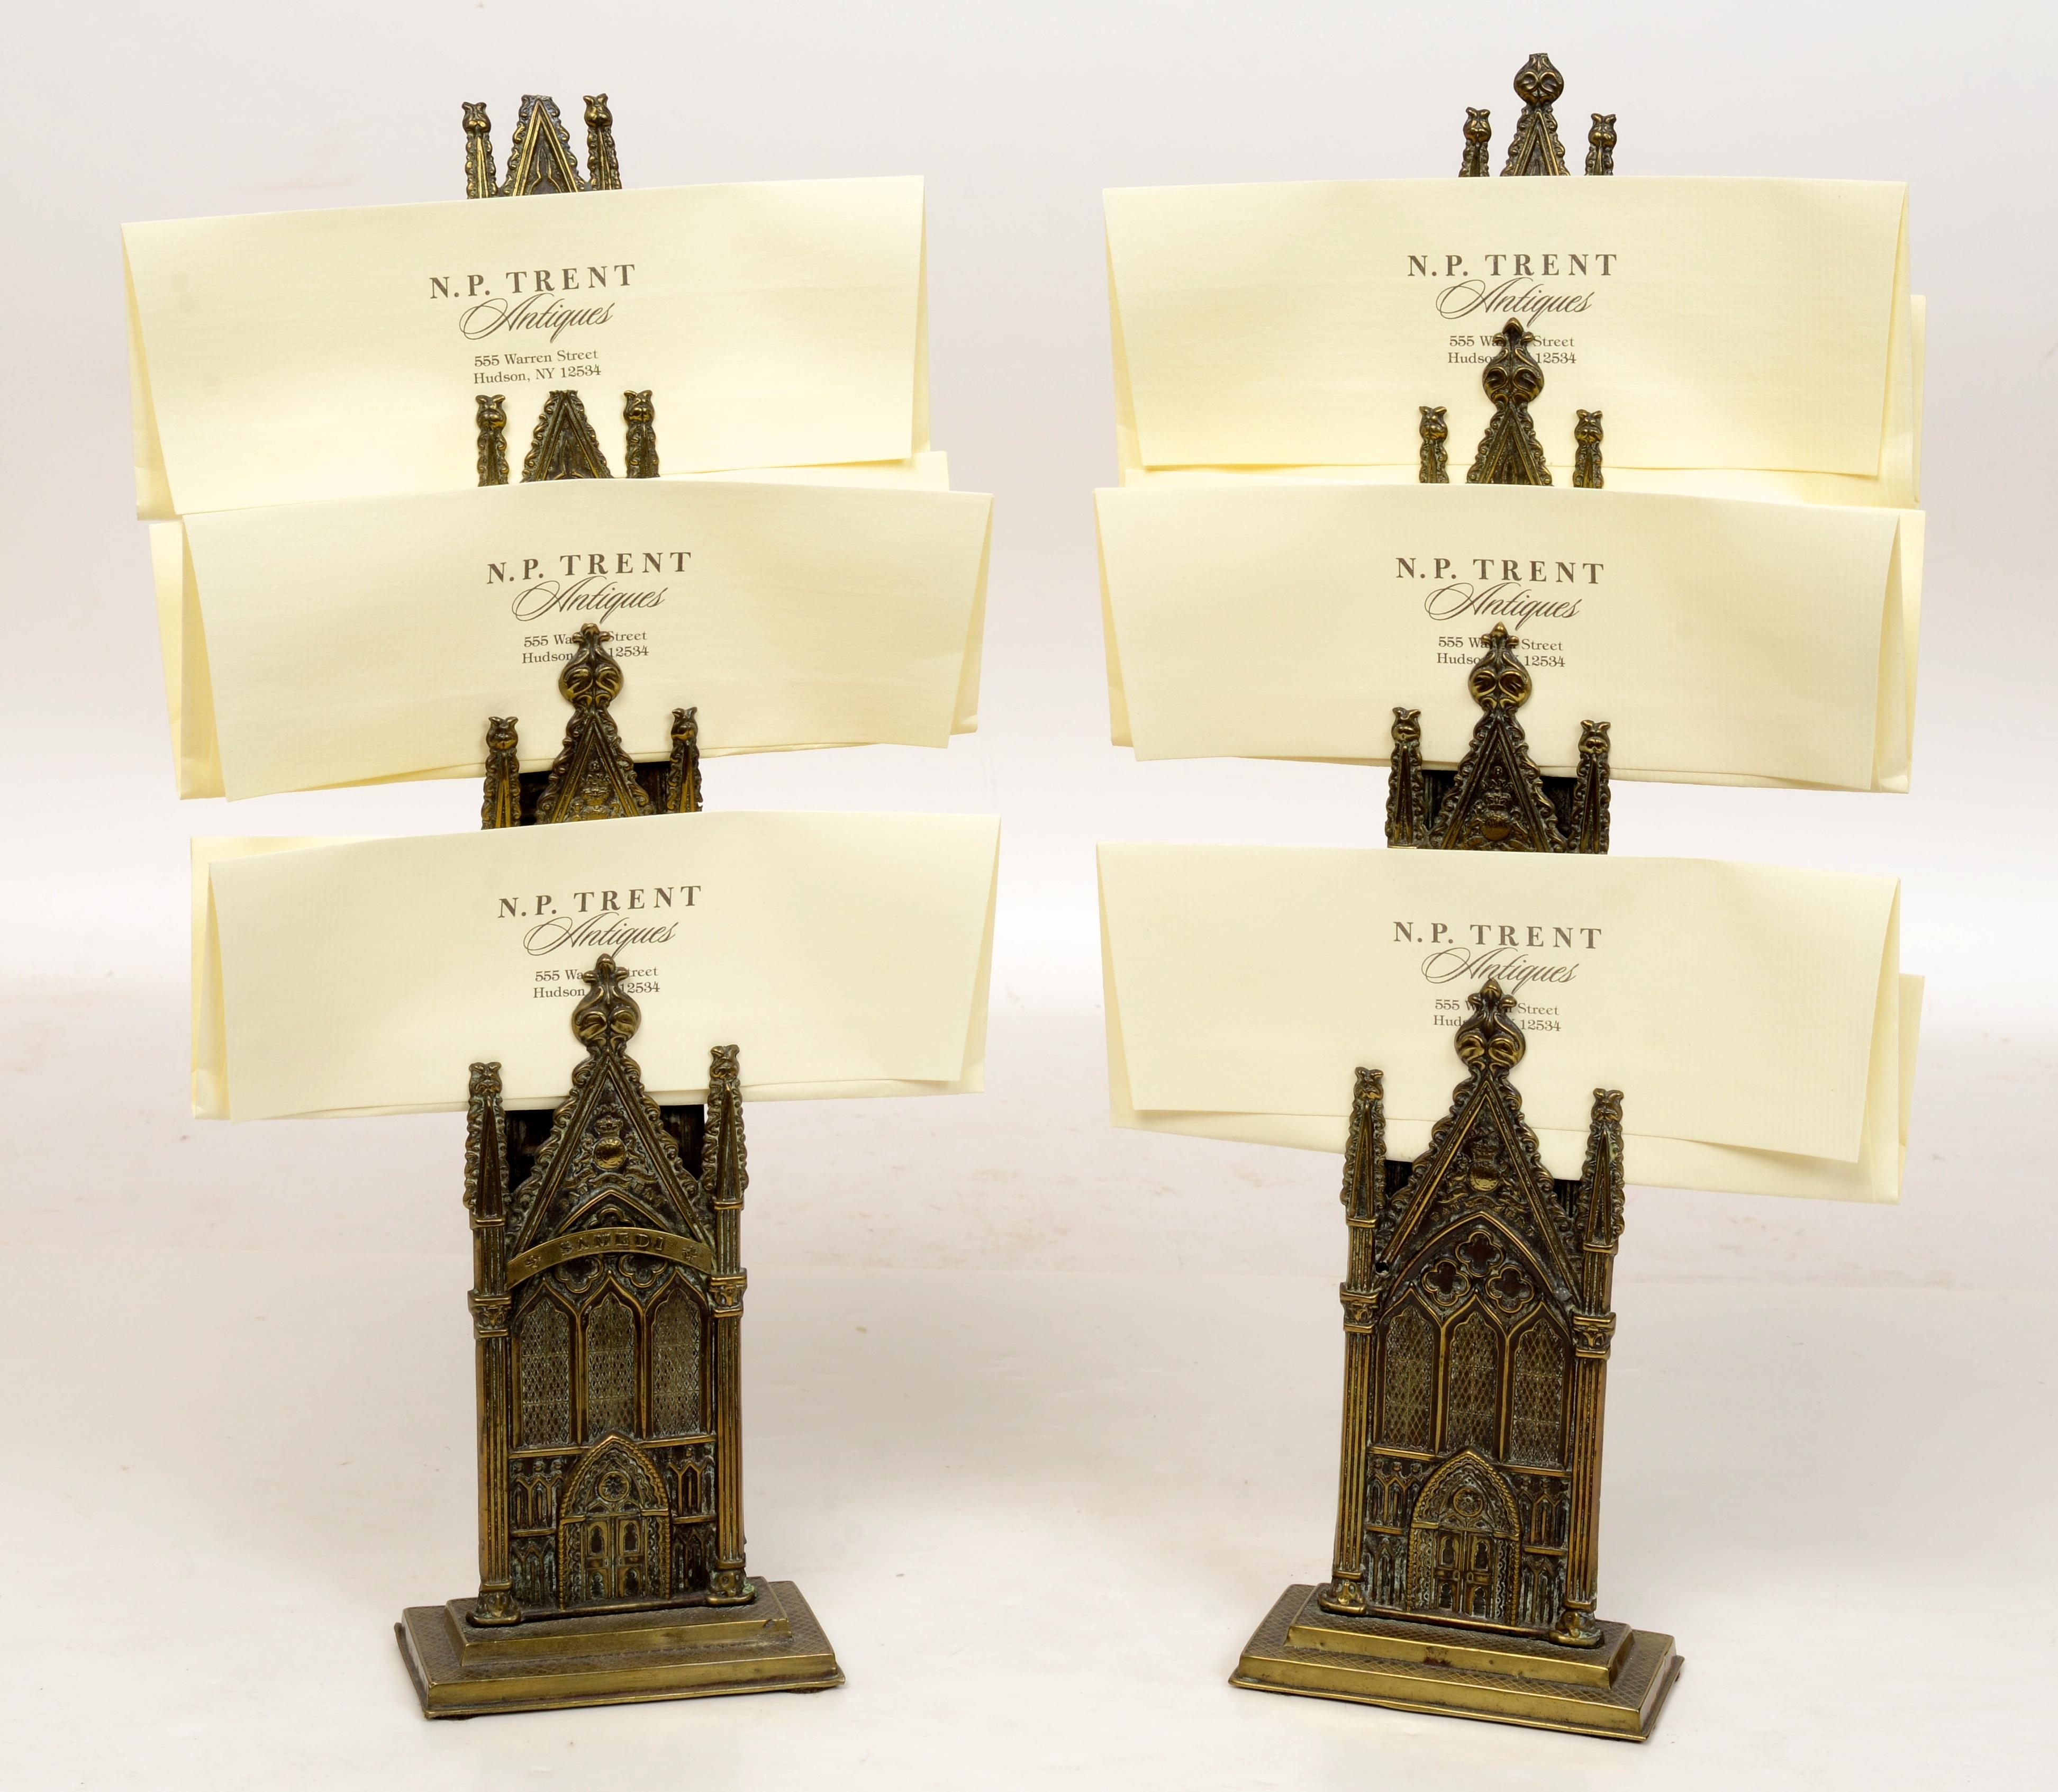 A pair of Victorian Gothic revival pressed brass letter Racks, 19th c. B. Days Patent, with the Royal Coat of Arms, both in the form of a Gothic multi-spired cathedral, each spire labeled with a day of the week in French, on a stepped plinth. One